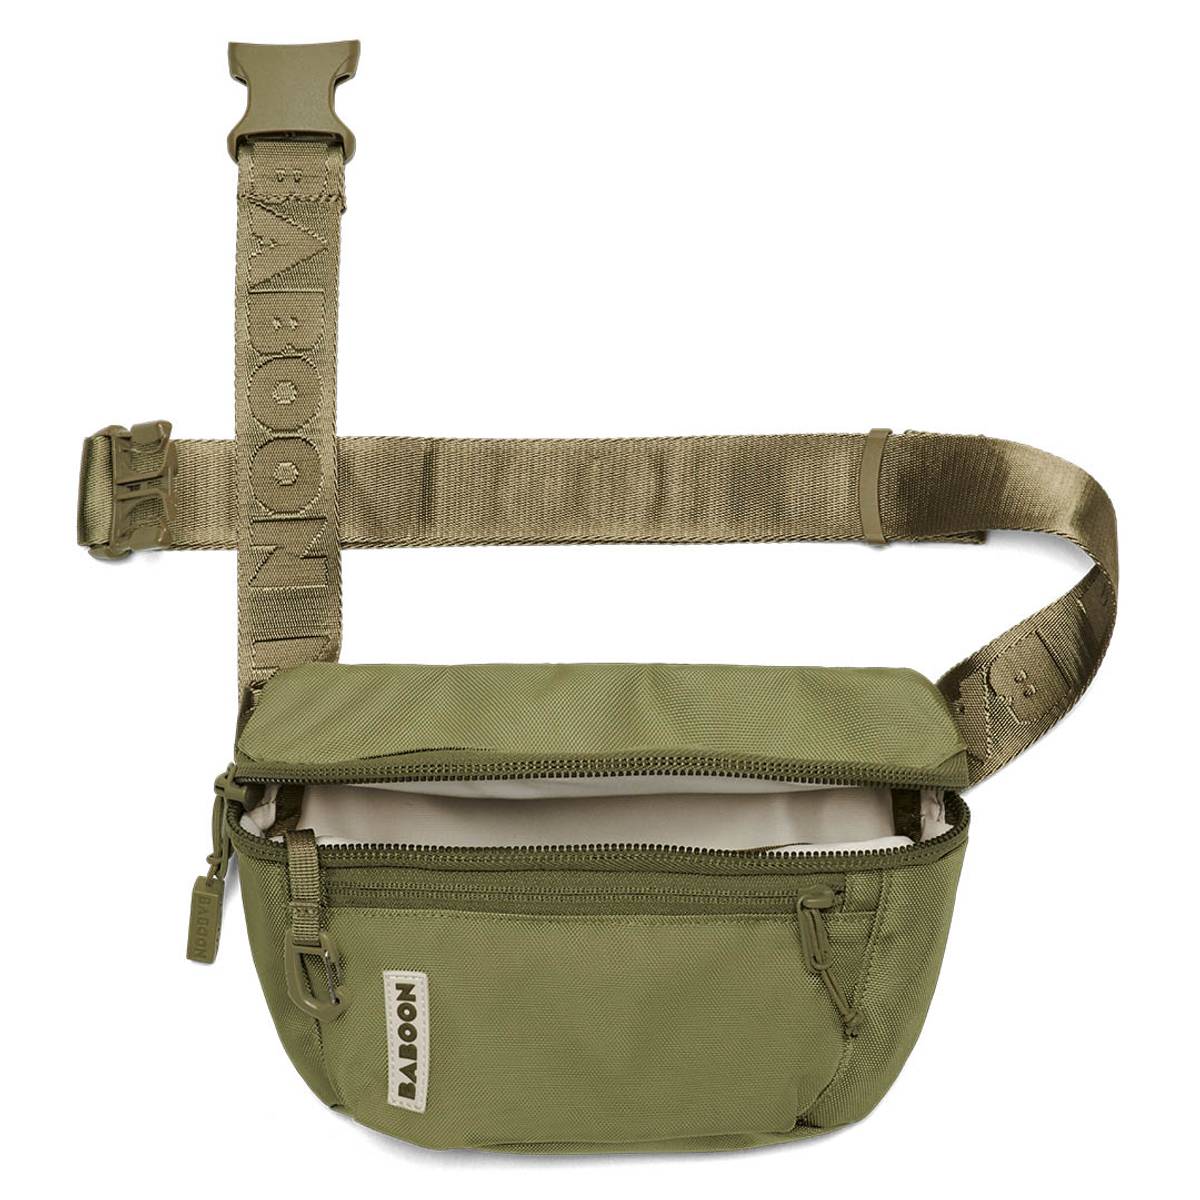 BABOON Fannypack (3L): For festivals, city adventures or travel ...